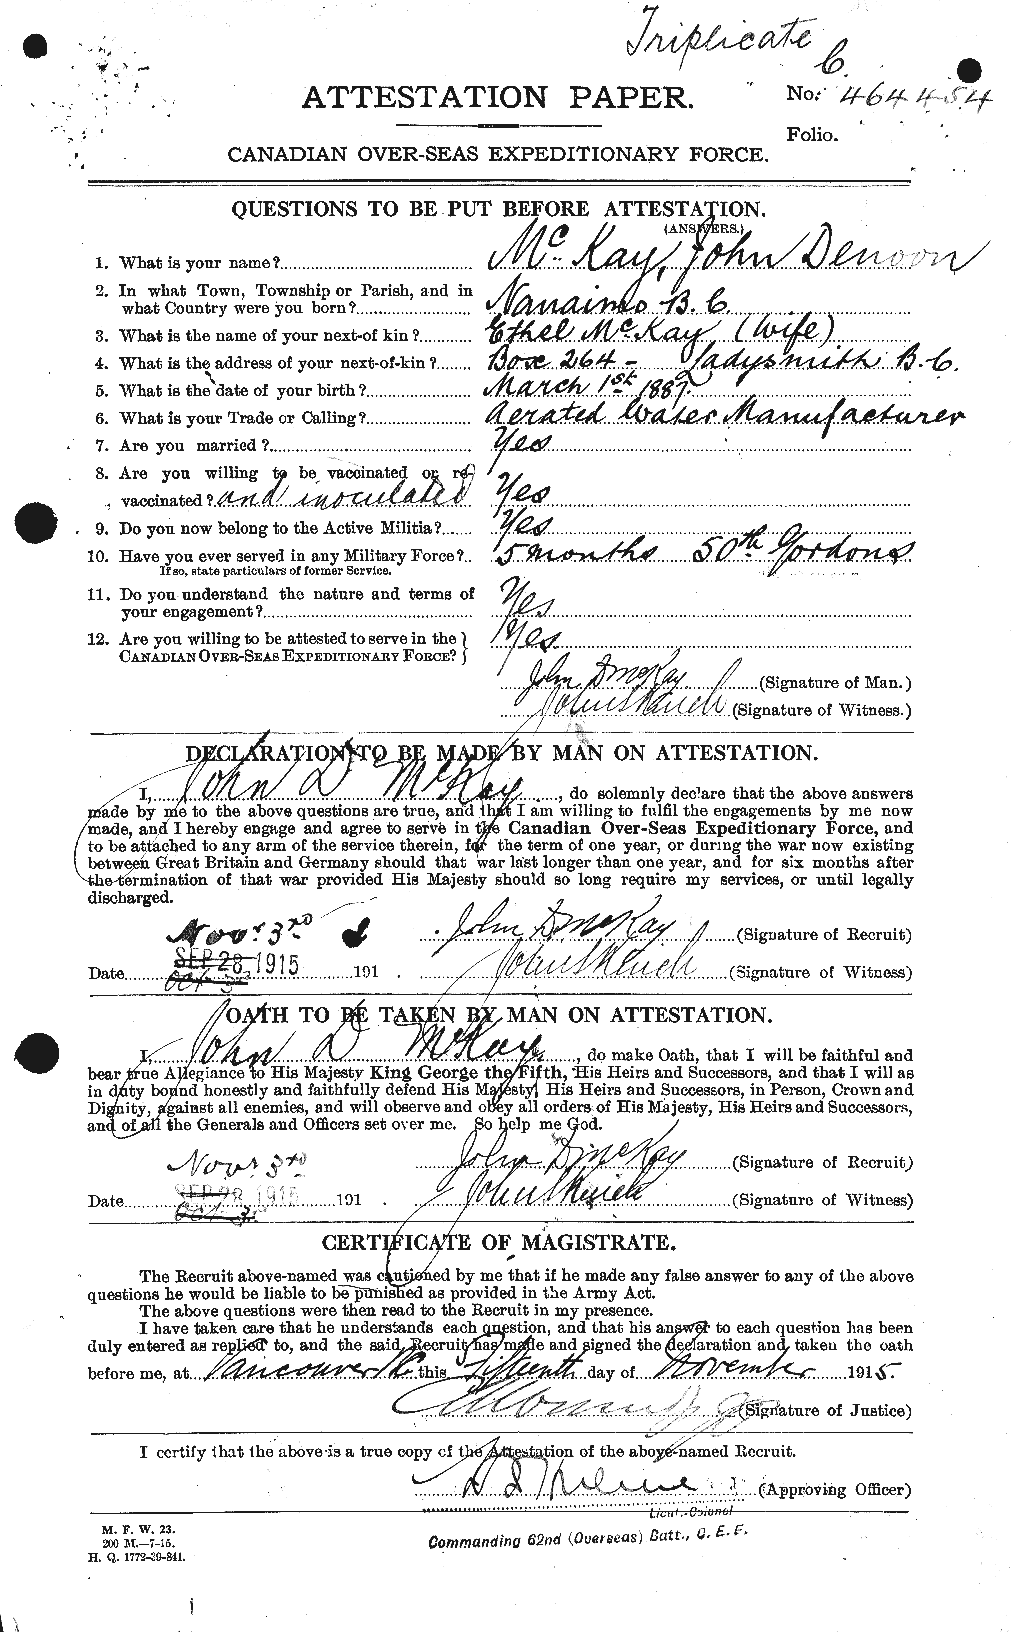 Personnel Records of the First World War - CEF 527042a